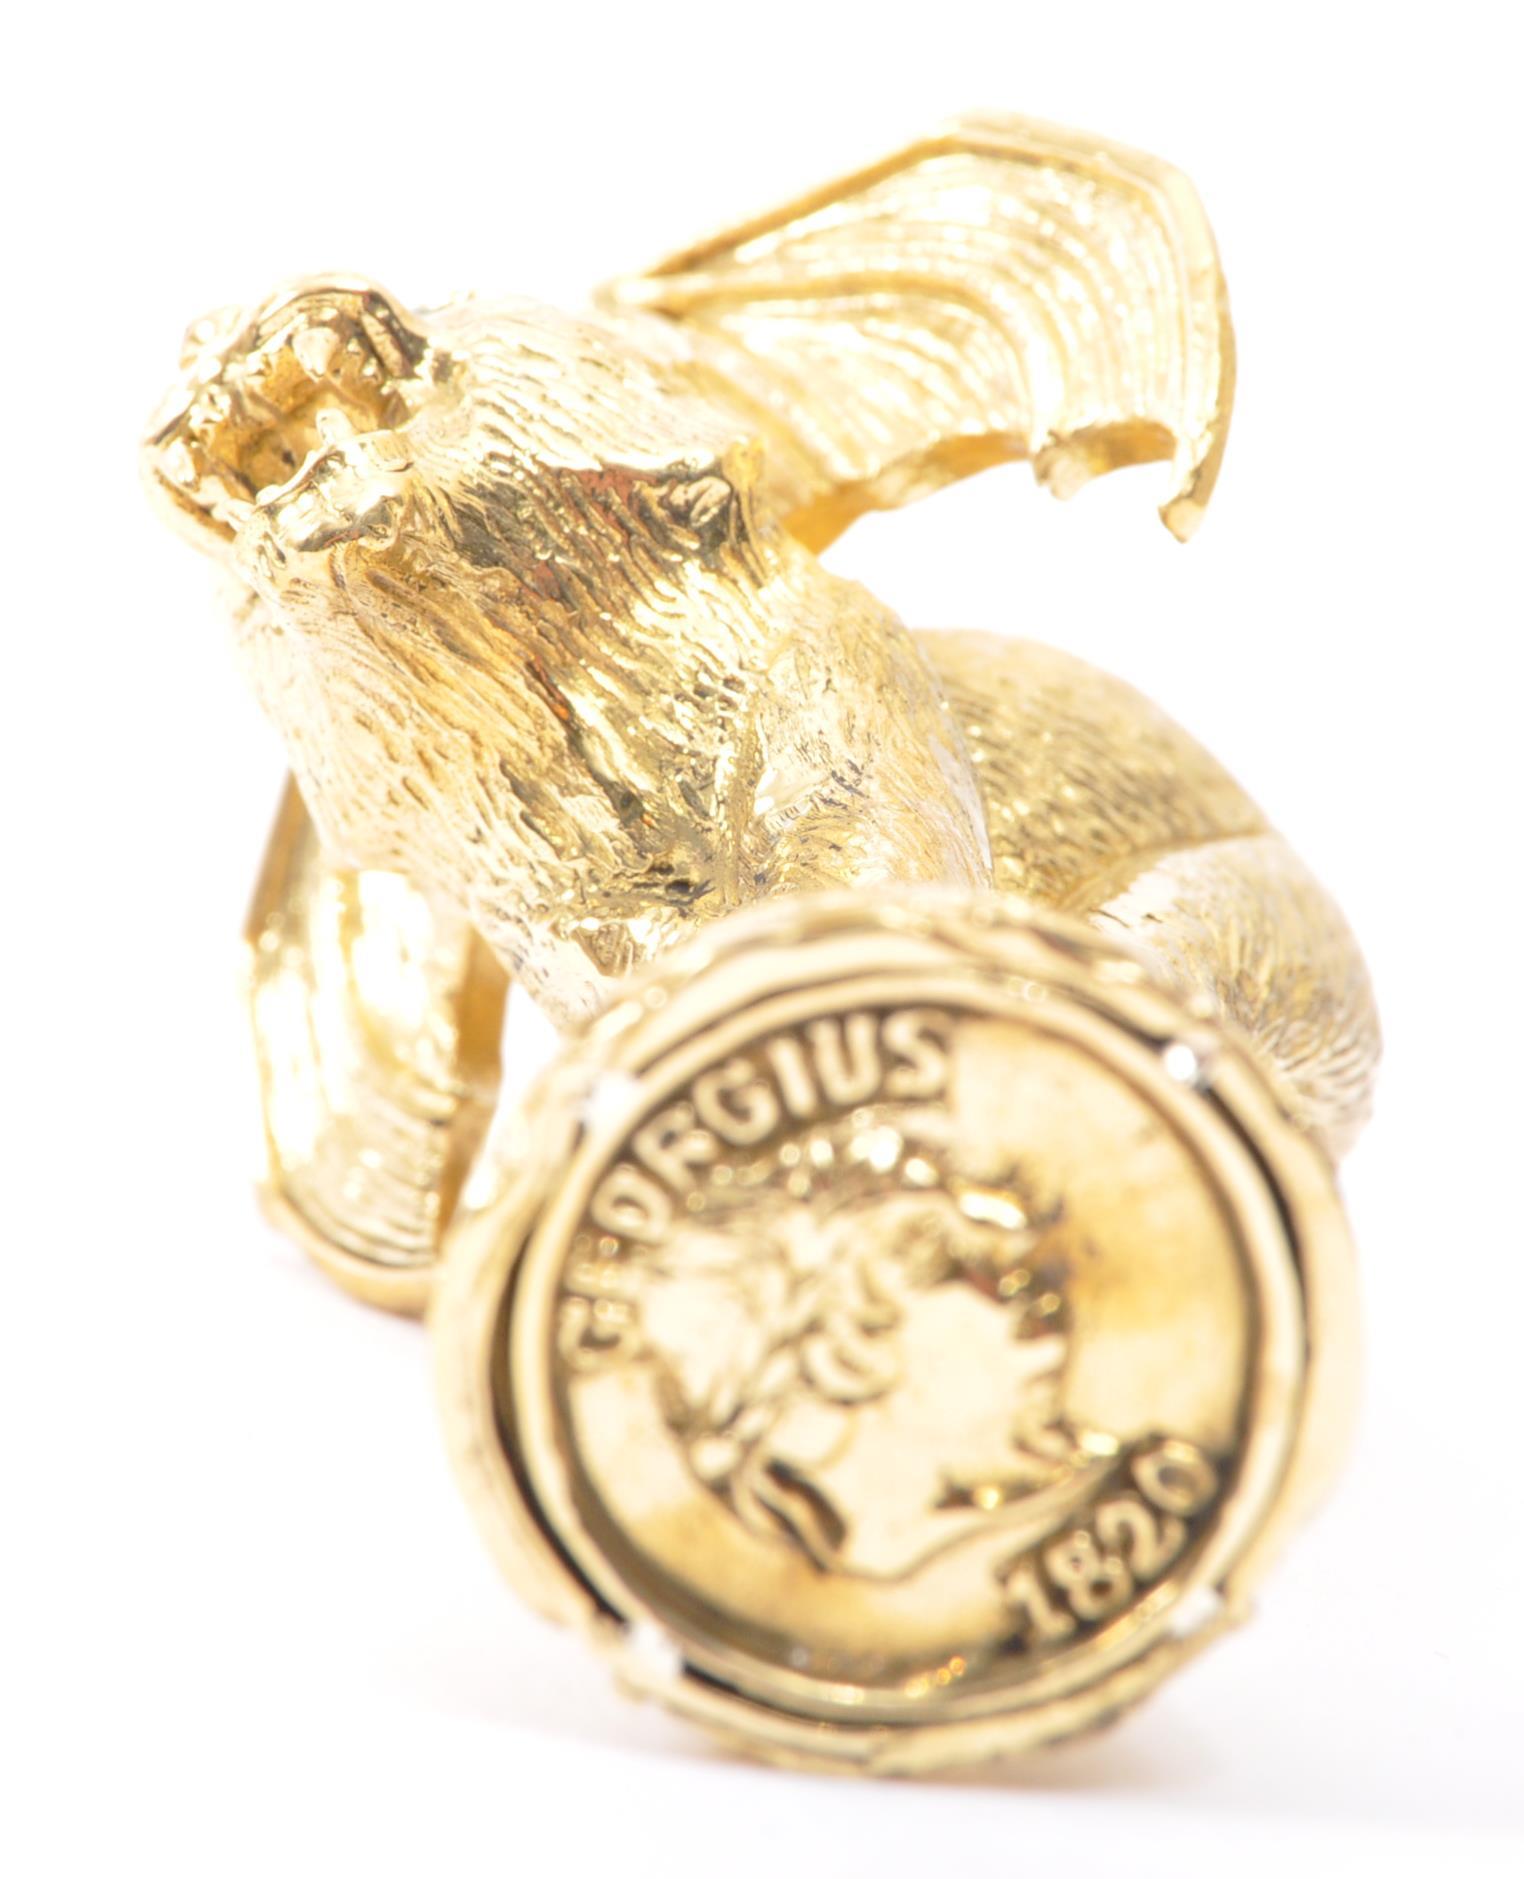 NOVELTY VICTORIAN STYLE LETTER SEAL - Image 5 of 5